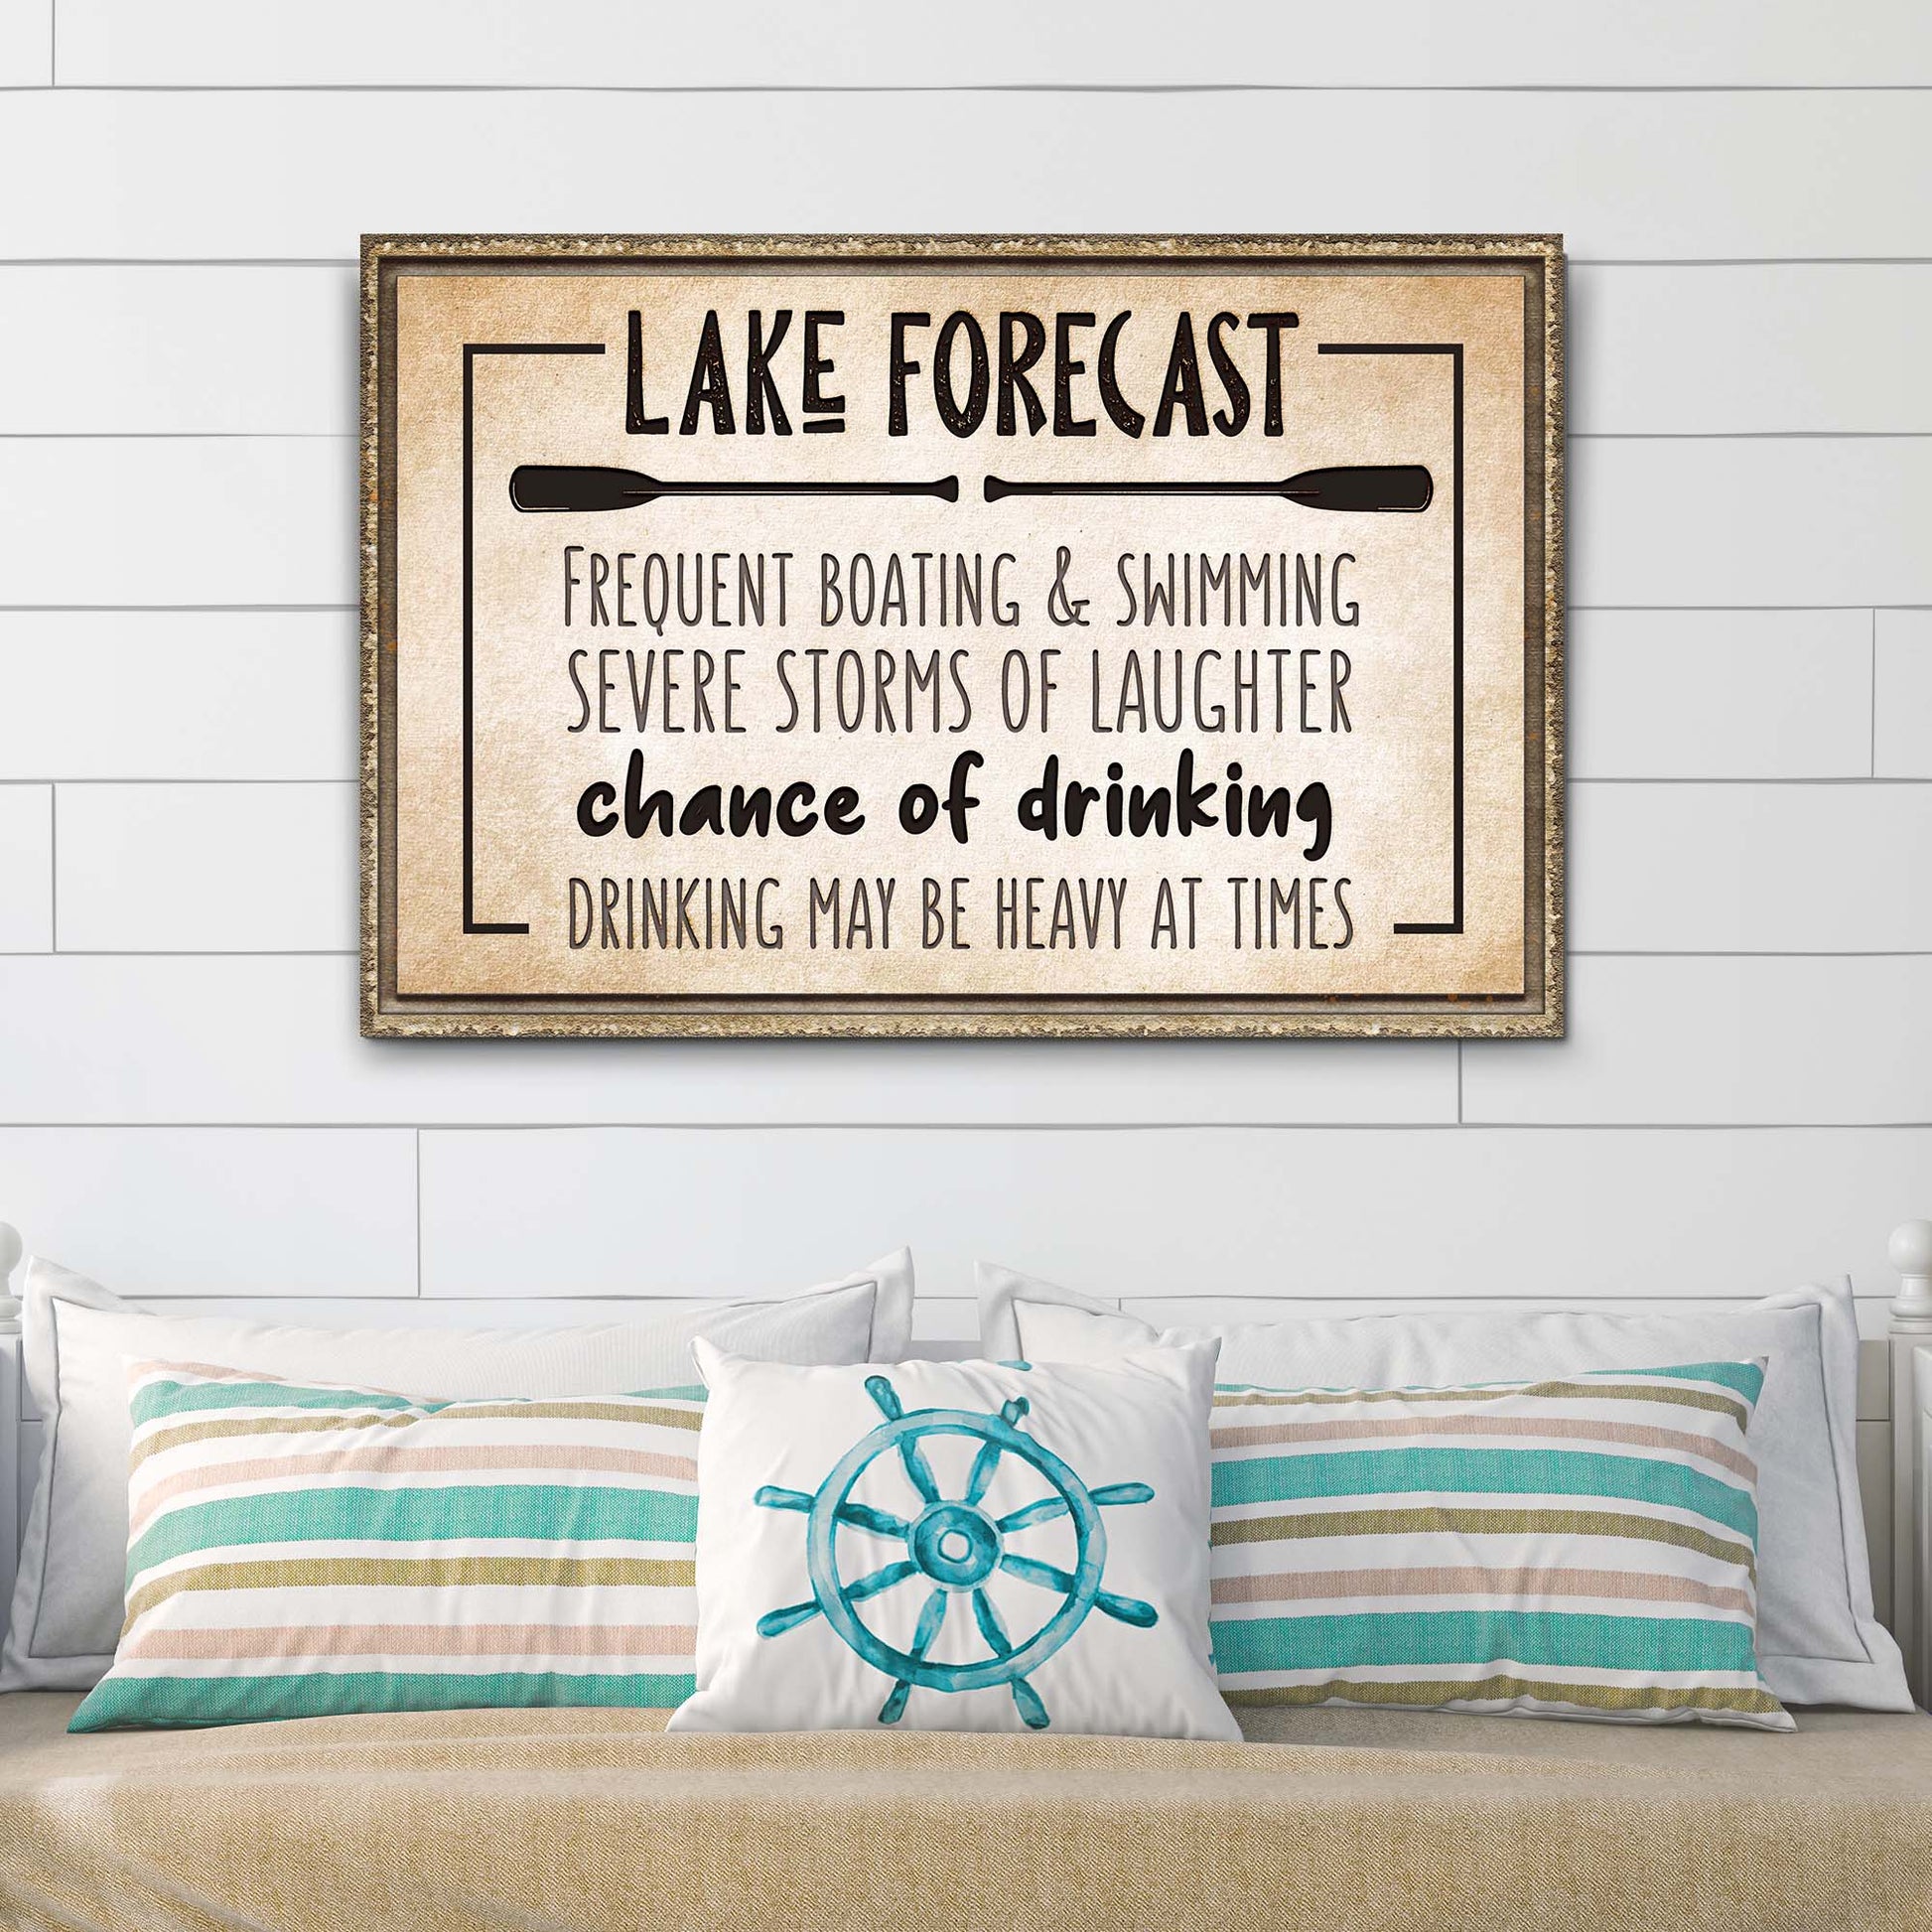 Lake Forecast Sign - Image by Tailored Canvases